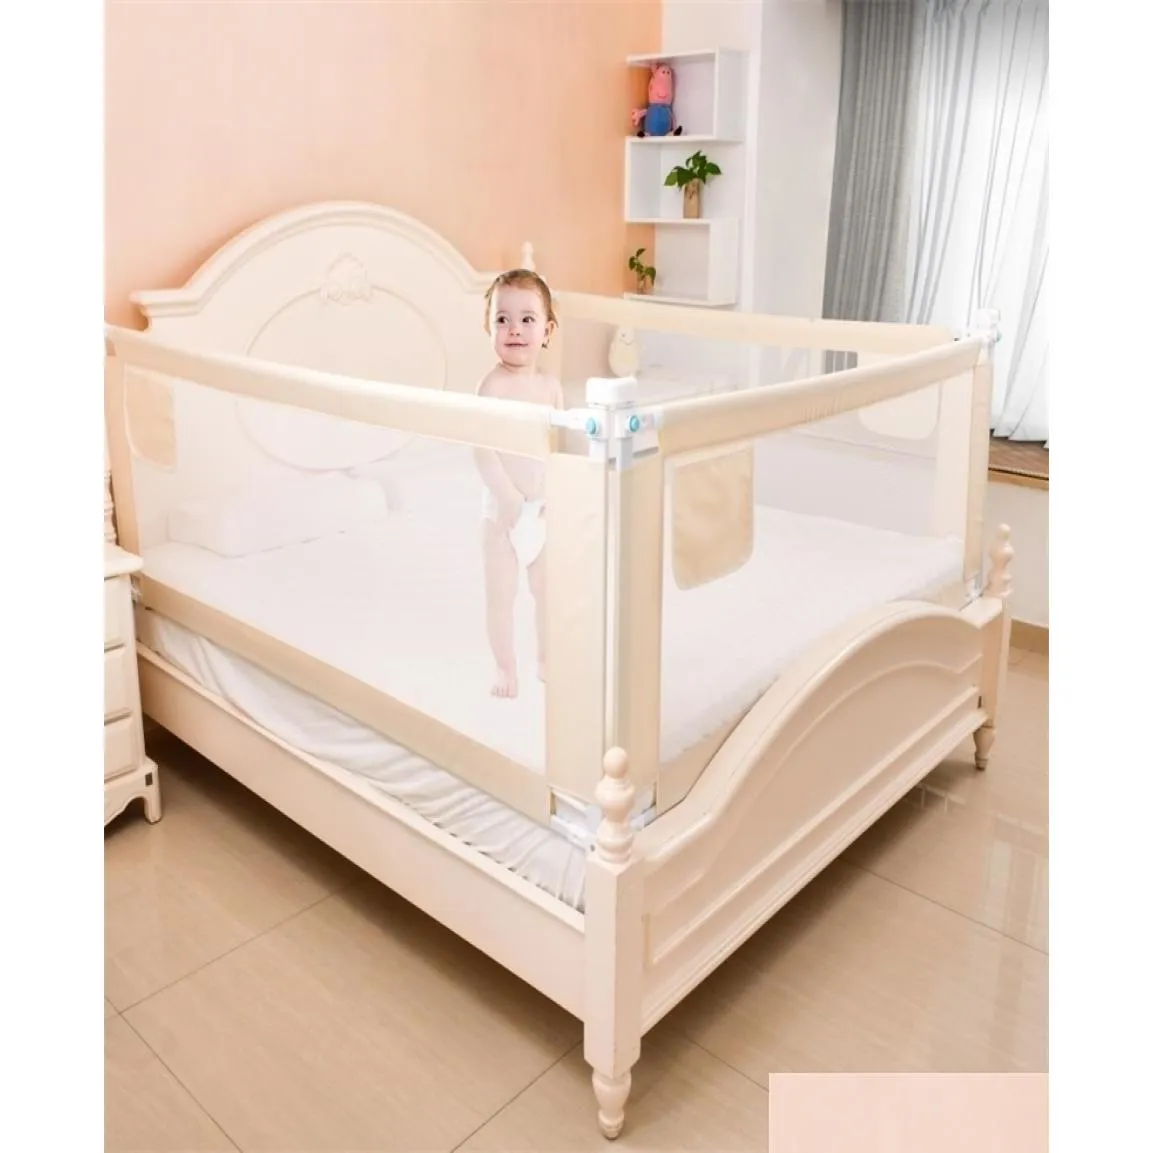 Bed Rails Numbera Rail Baby Playpen Fence Guard For Kids Protection Playground Safety Home Security Bumpers Guardrail Drop Delivery Ma Otmt2